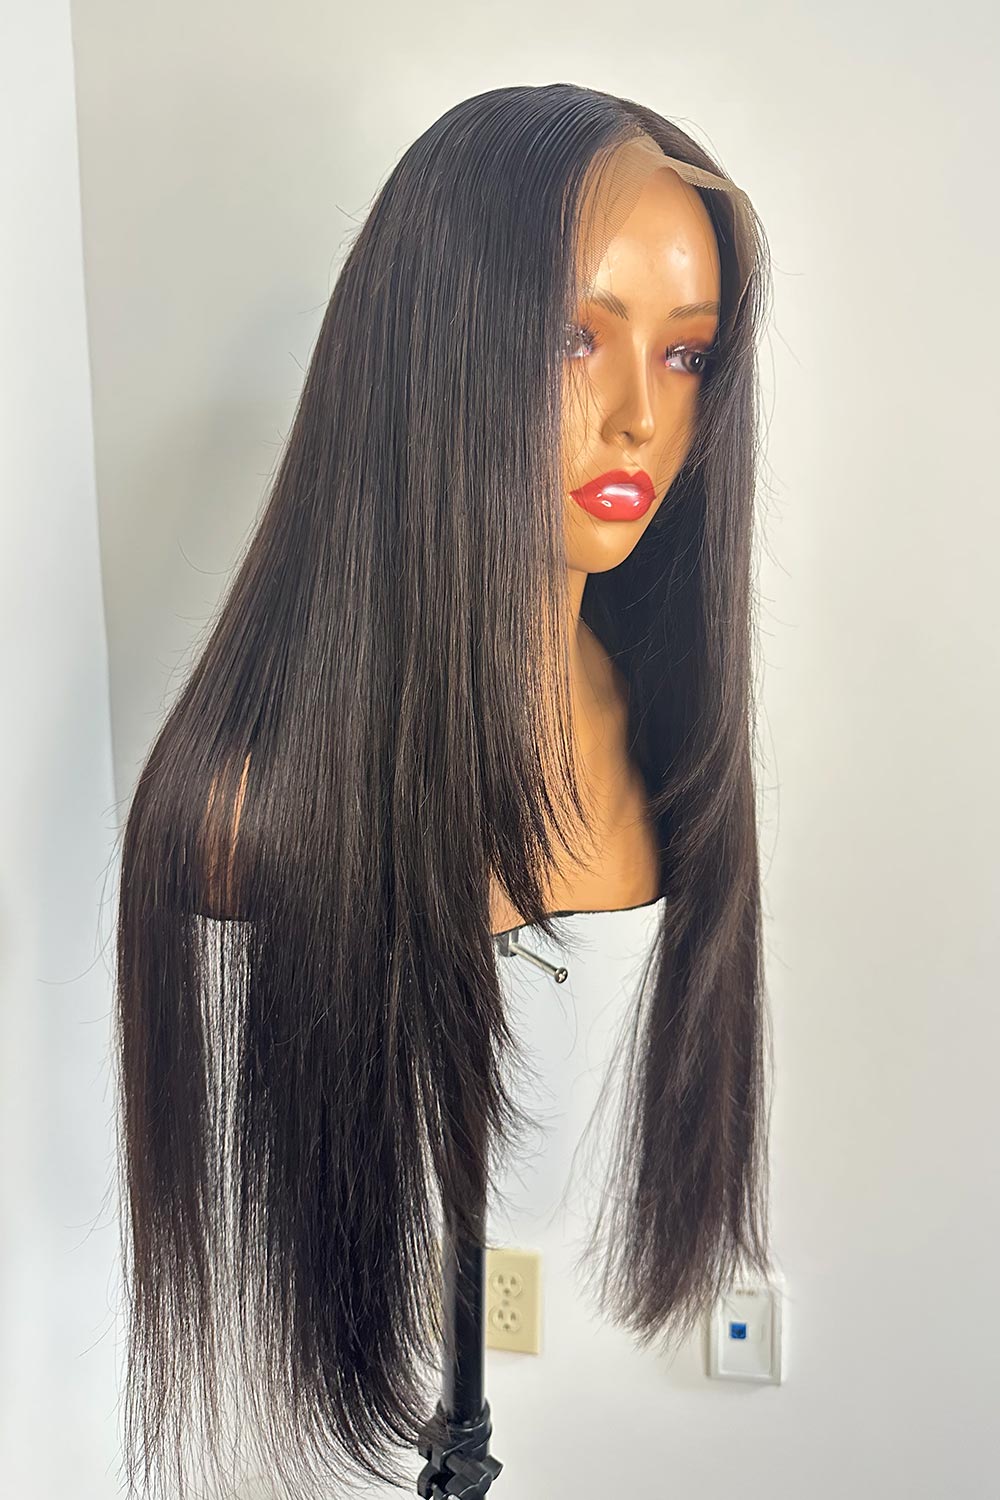 Designer Wigs-Layered Cut 24" Silky Straight 13x6 Lace Wigs